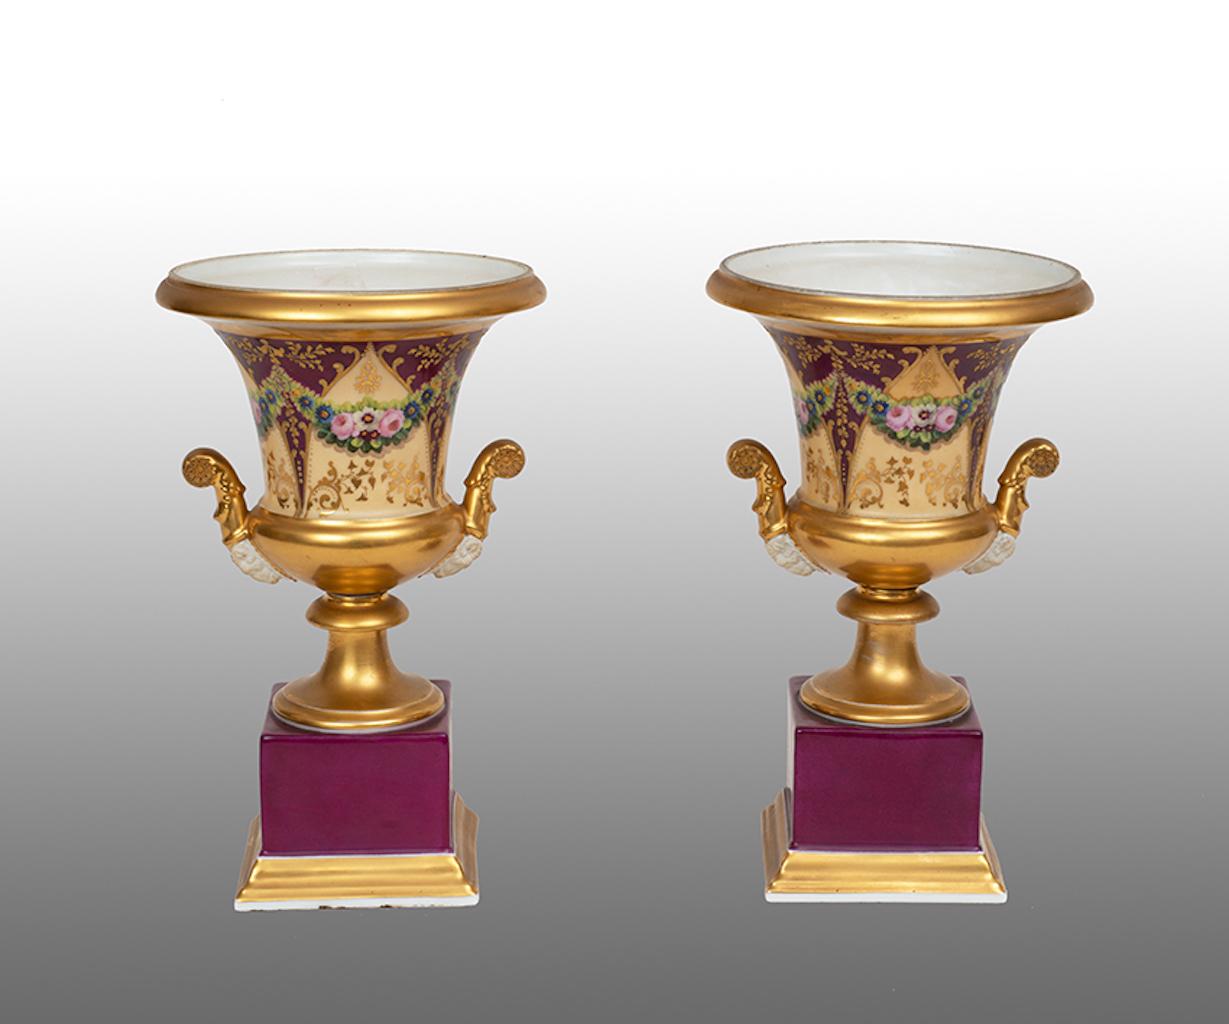 Pair of antique crater vases French Empire 